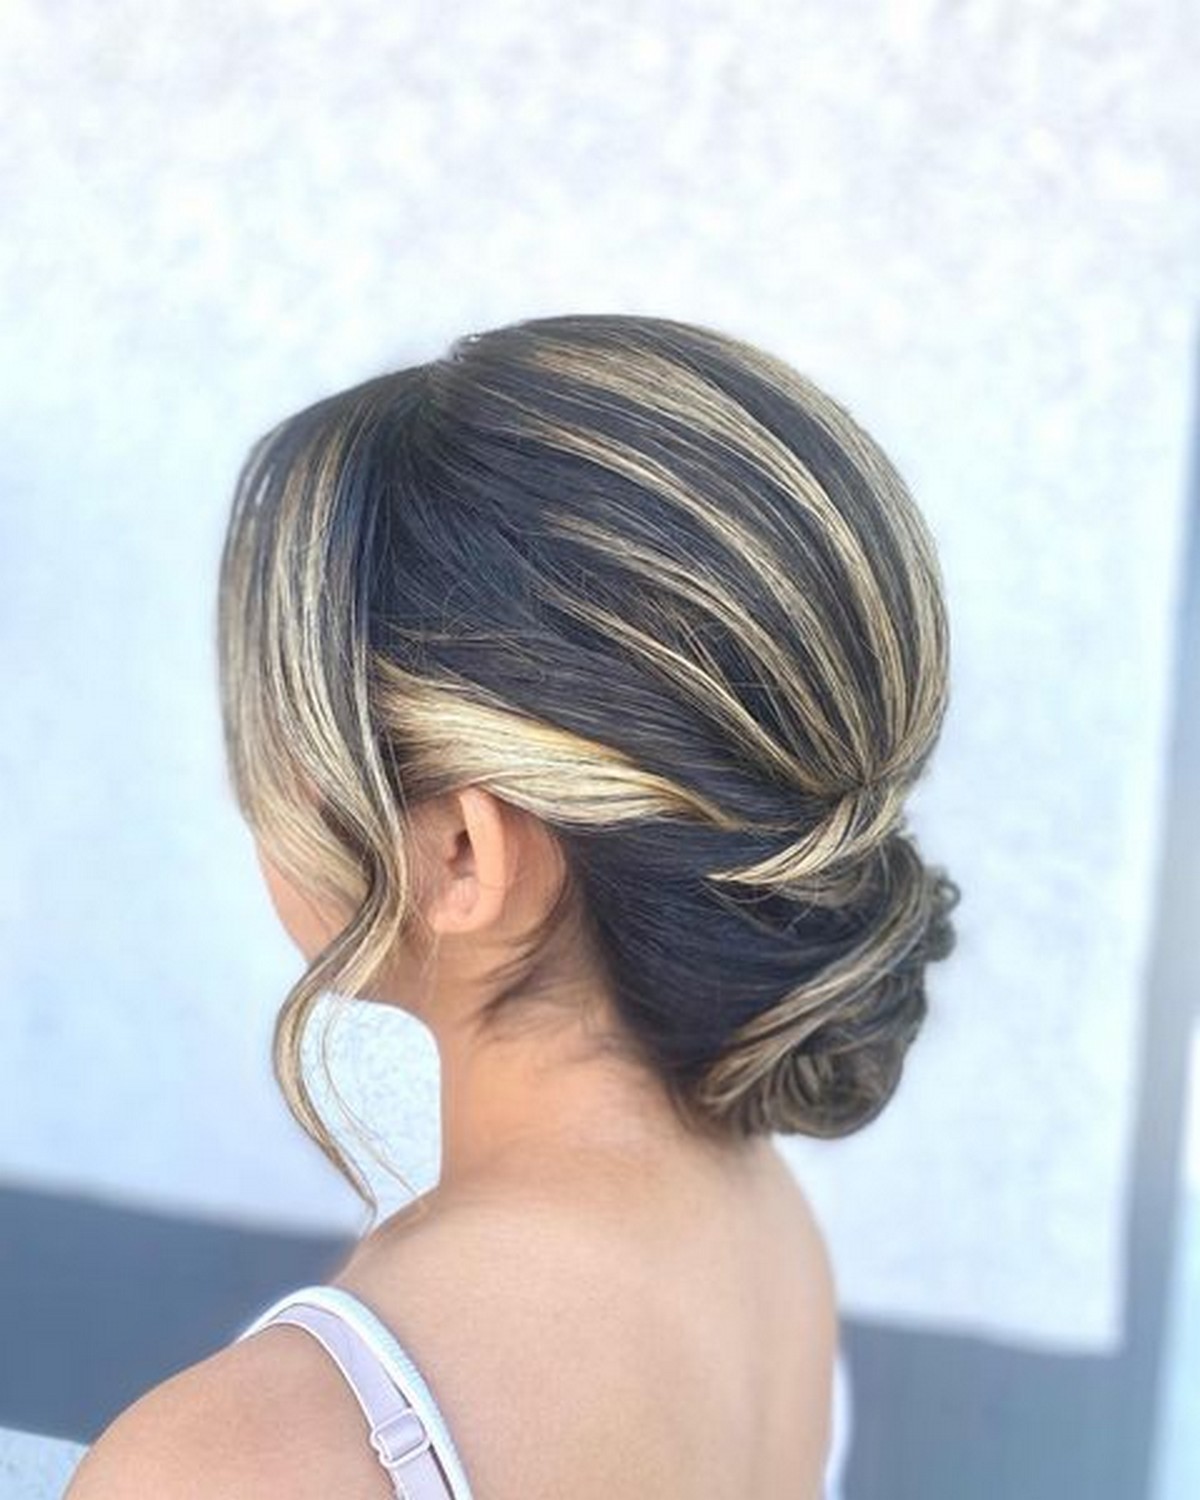 Highlight Low Updo With Feather Bangs